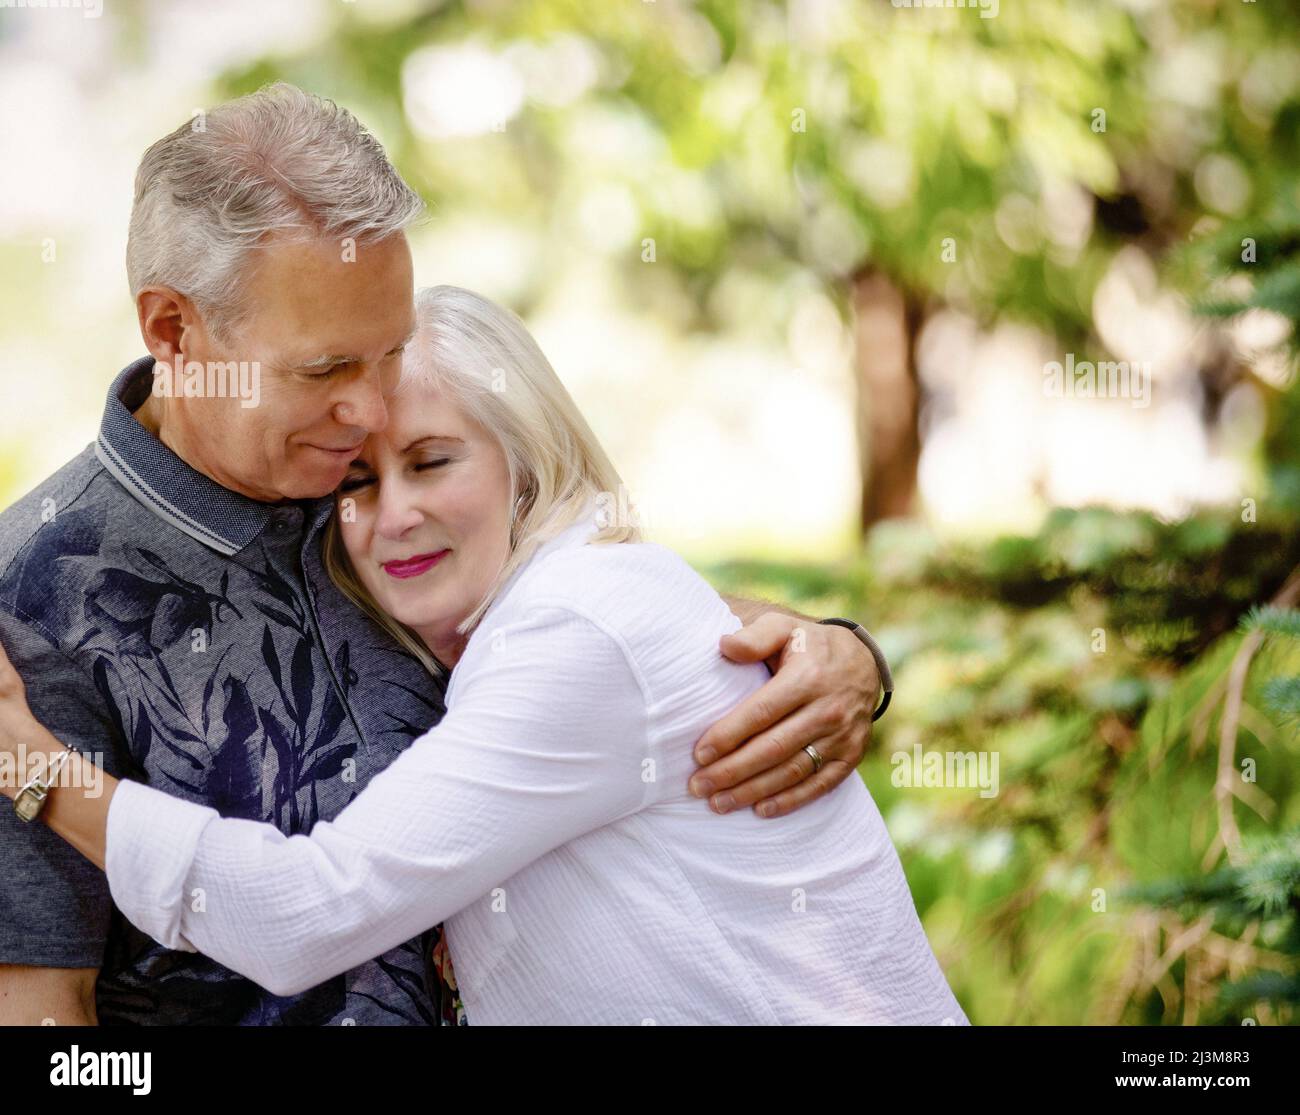 Mature couple sharing an embrace while walking outdoors on a park trail; Edmonton, Alberta, Canada Stock Photo